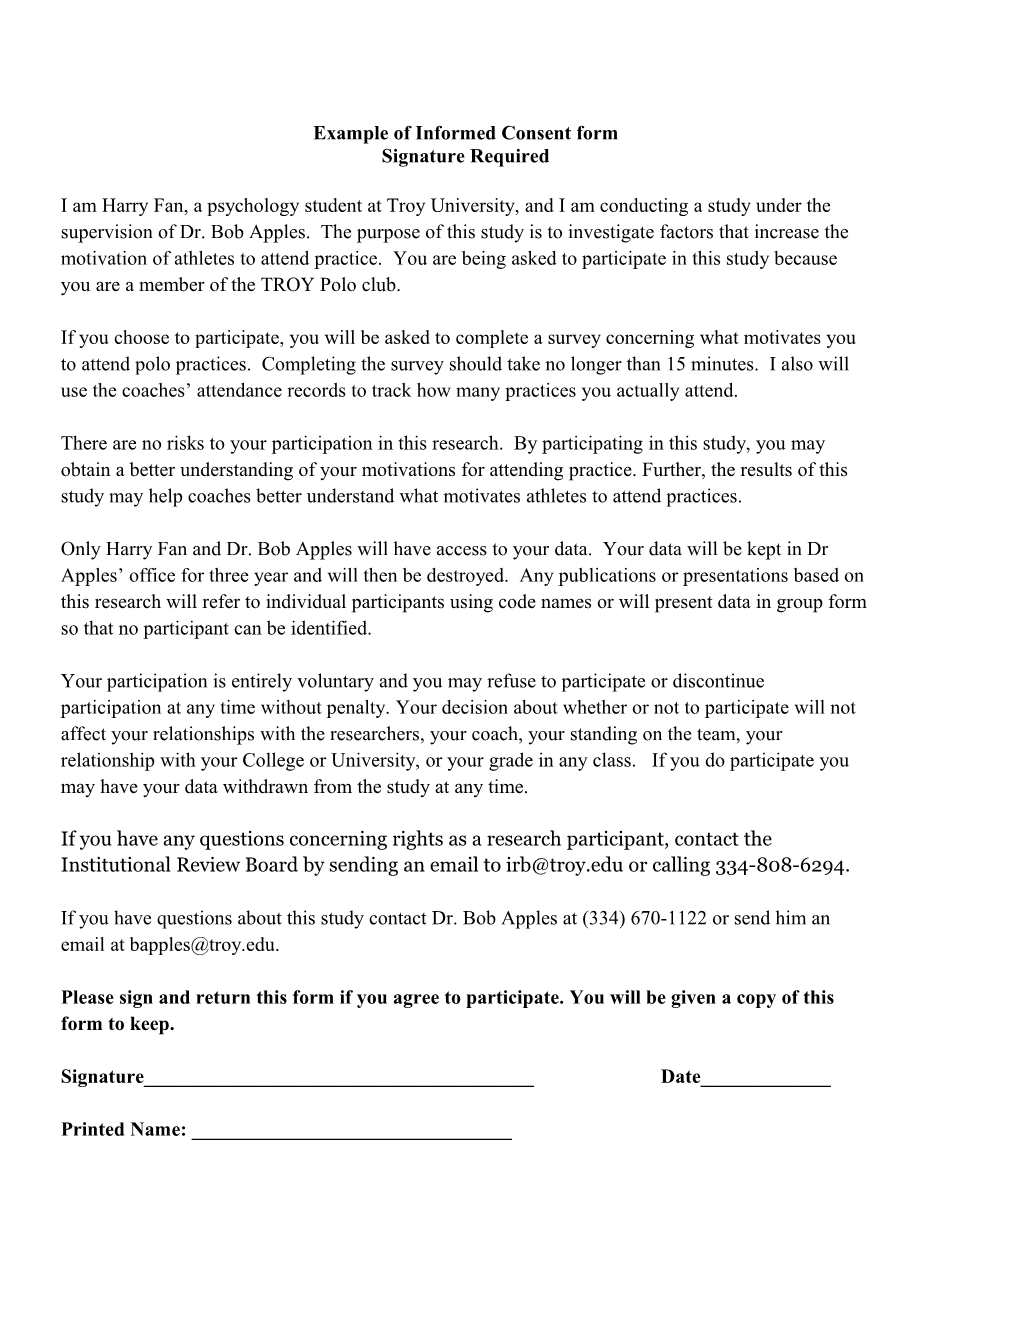 Example of Informed Consent Form JRM1